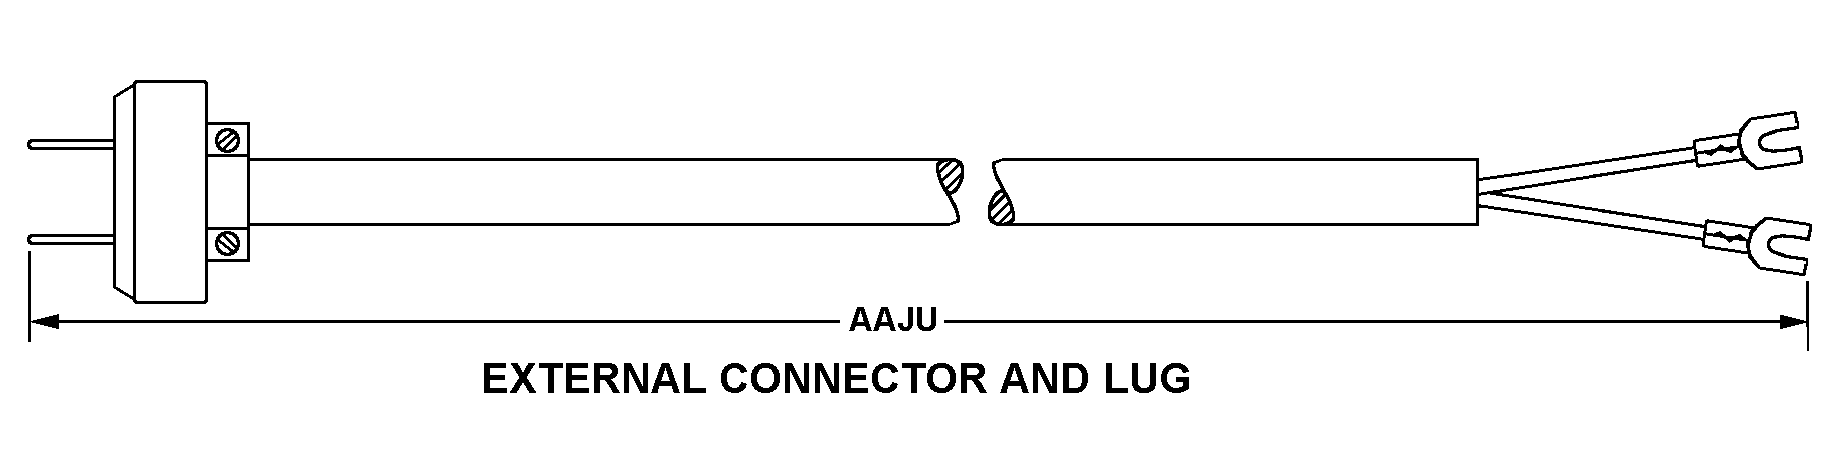 EXTERNAL CONNECTOR AND LUG style nsn 6150-00-805-7982